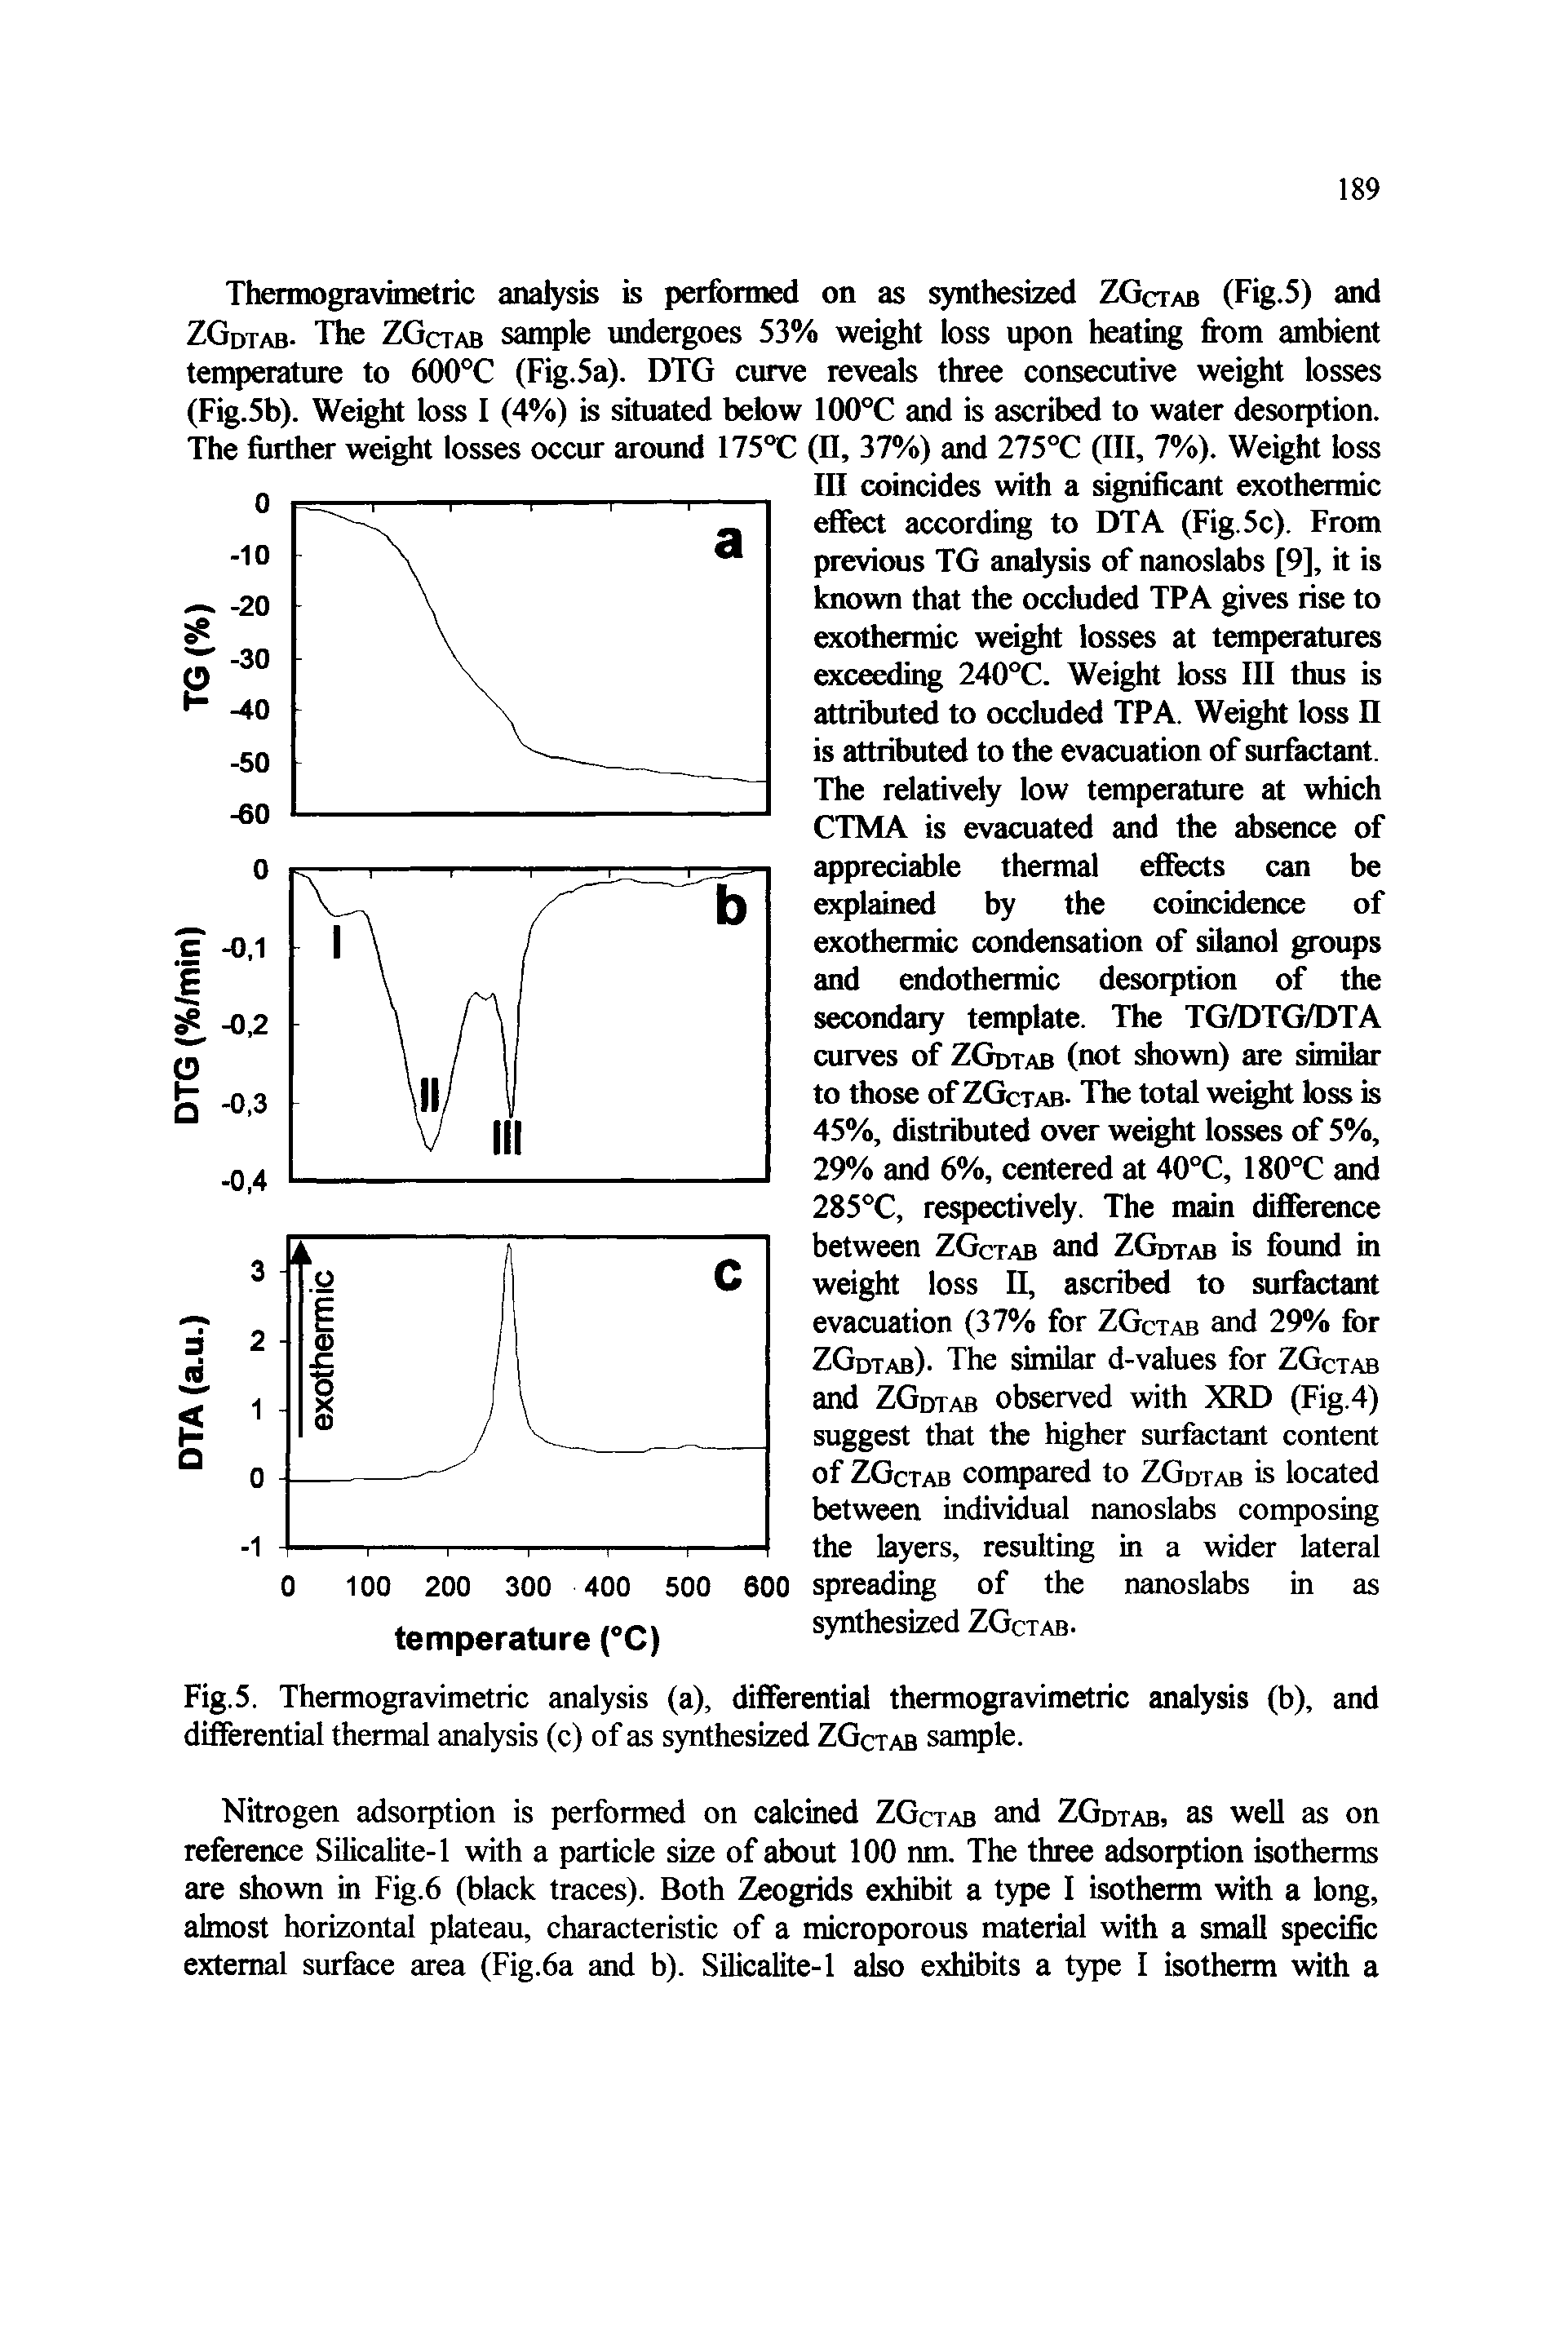 Fig.5. Thermogravimetric analysis (a), differential thermogravimetric analysis (b), and differential thermal analysis (c) of as synthesized ZGctab sample.